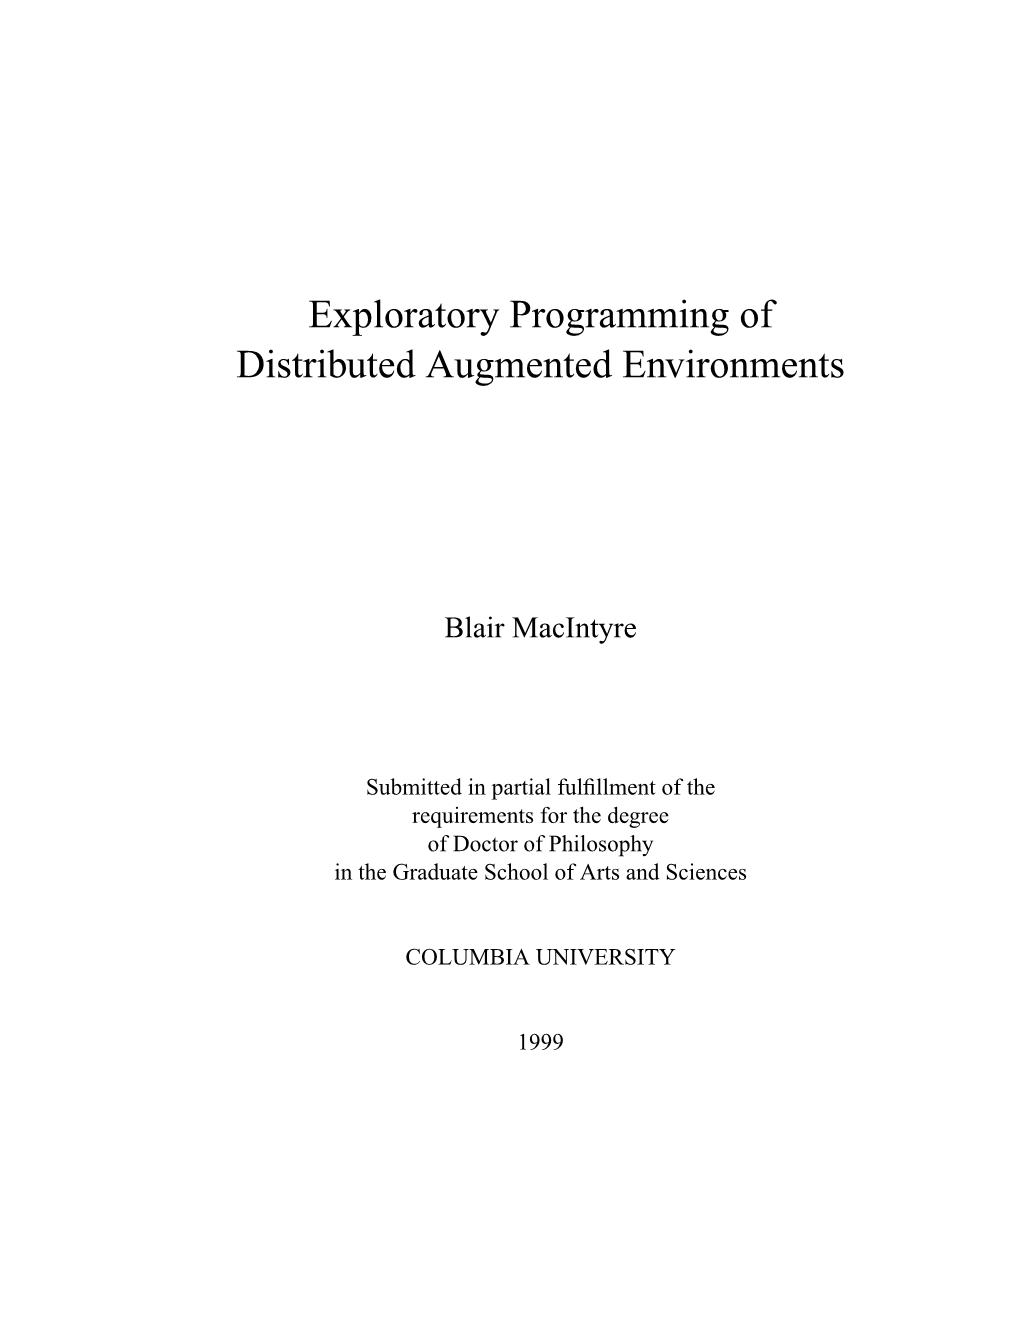 Exploratory Programming of Distributed Augmented Environments